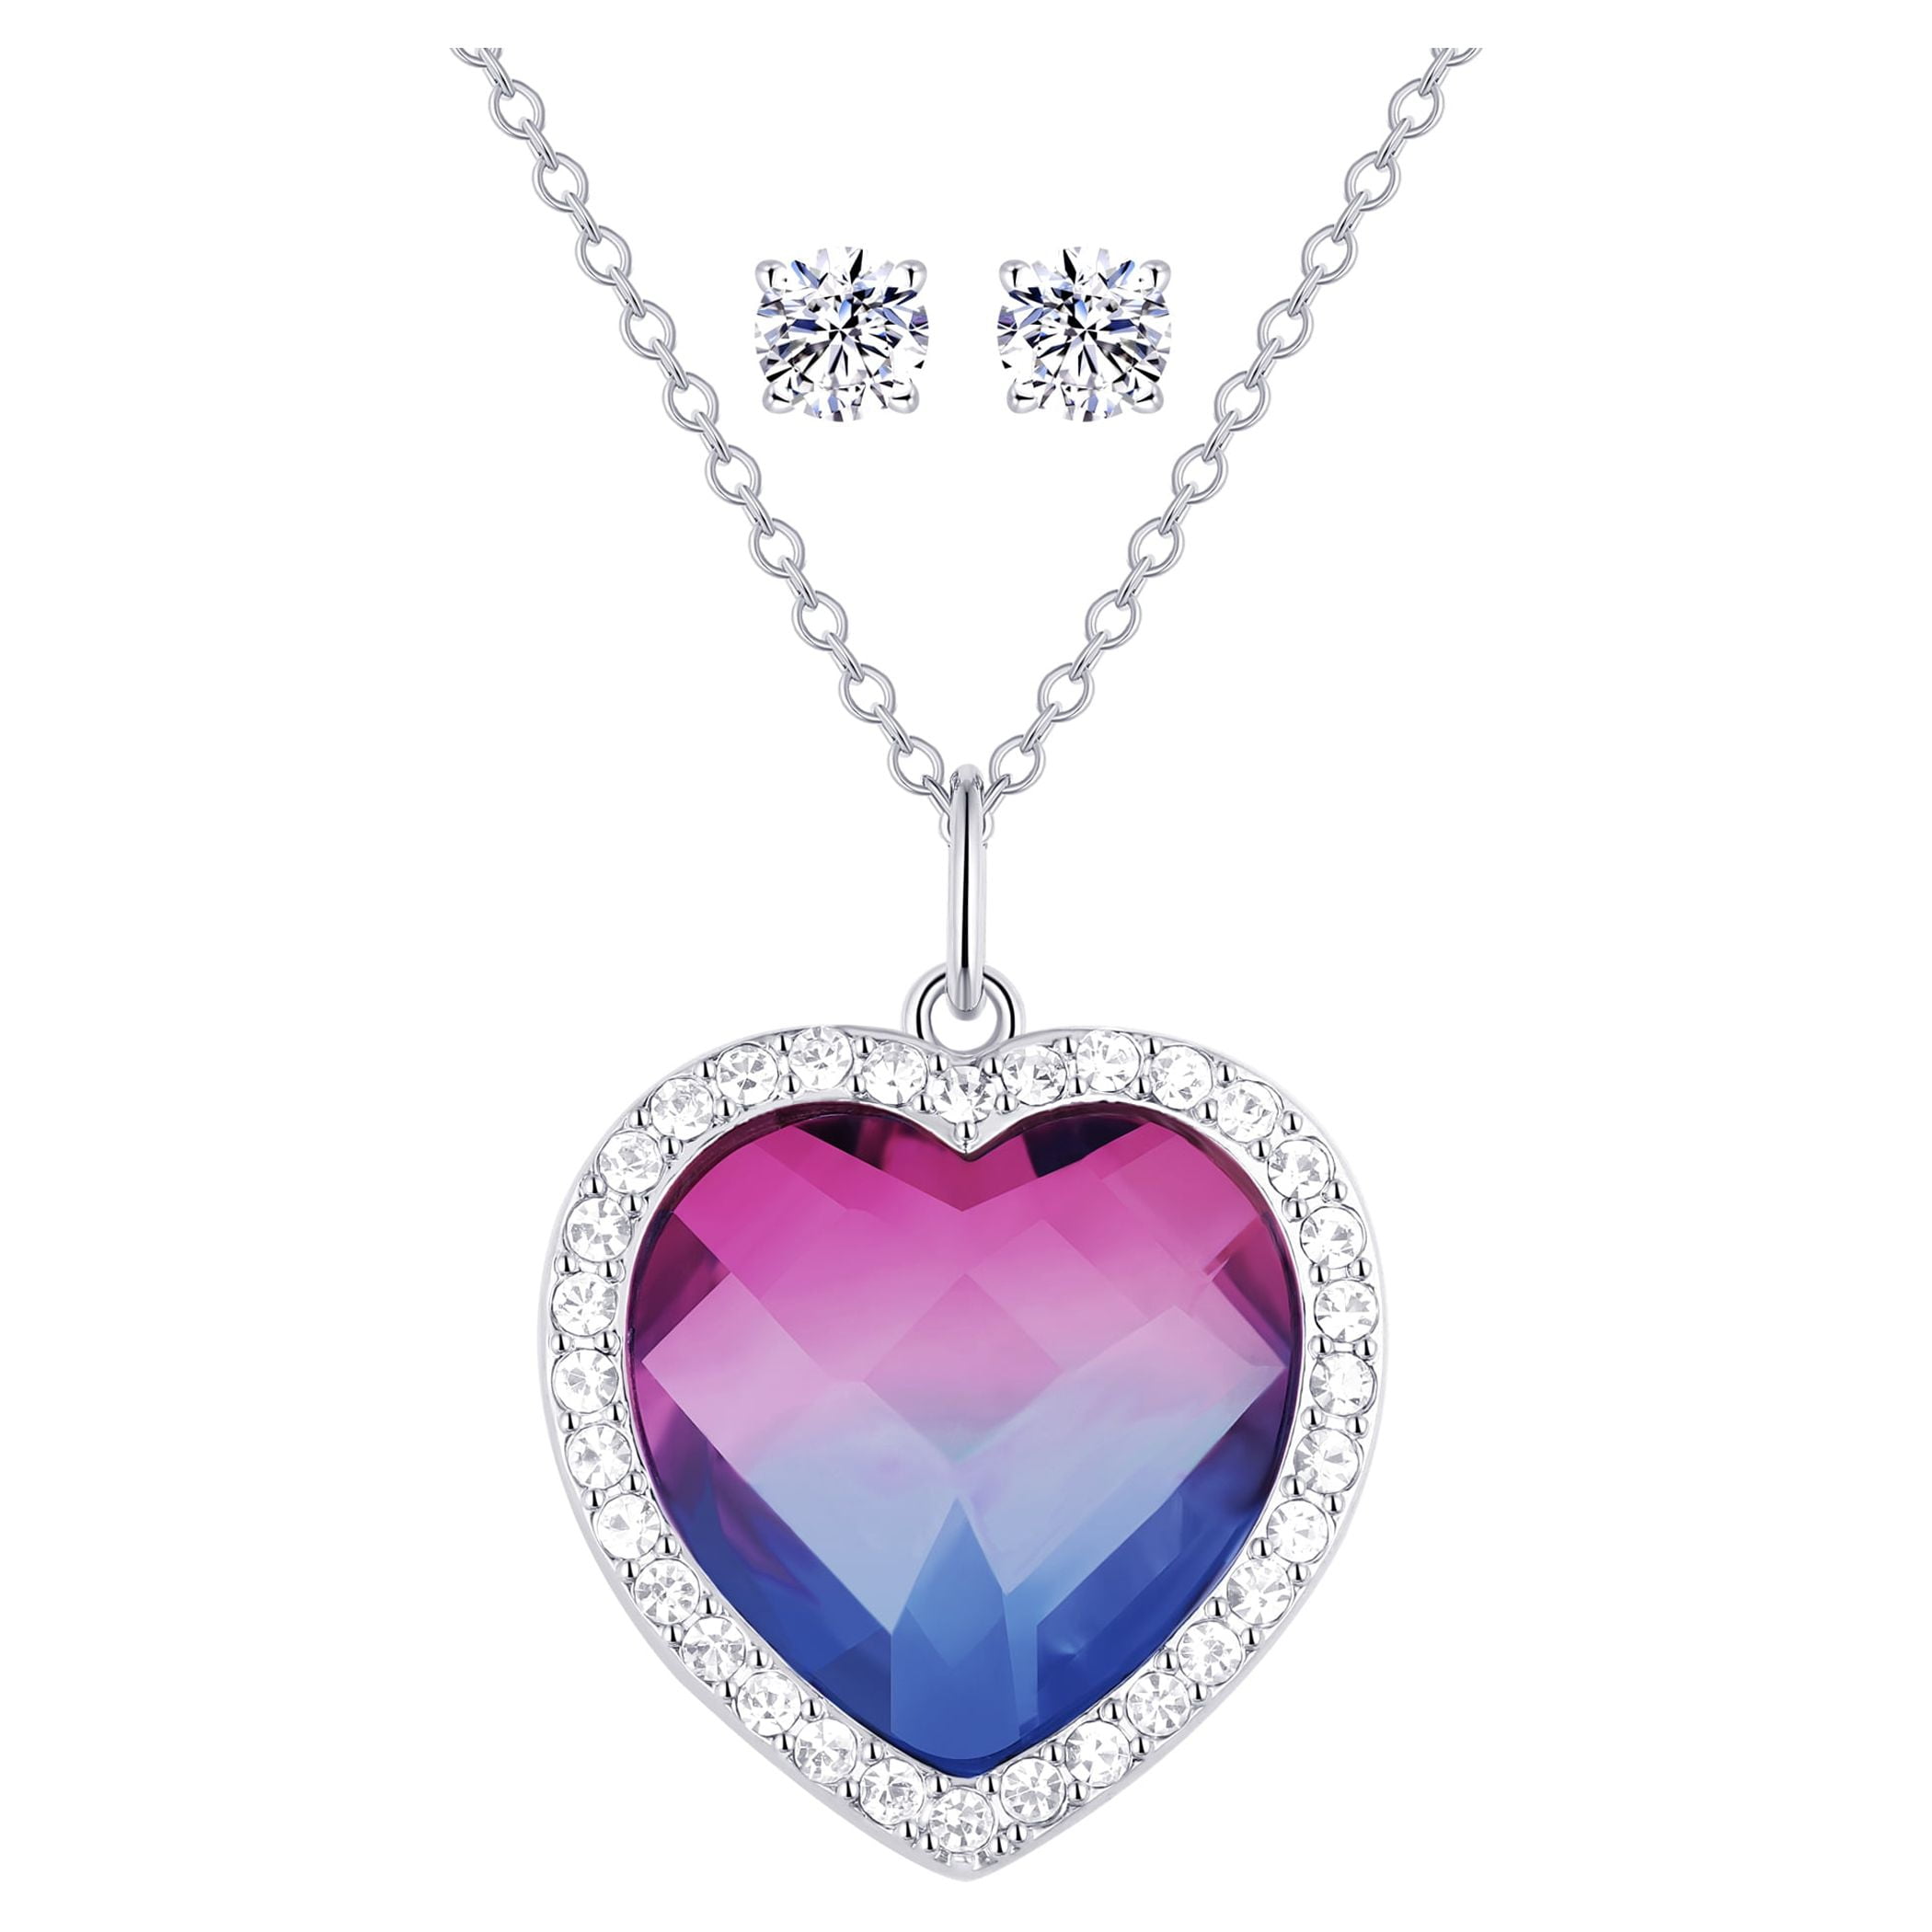 Buy PLATO H Girls Rhodium-Plated Alloy Heart Necklace Pink Crystal from  Swarovski for womens Mothers day gifts for Mom Pendant Jewelry Fashion  Large Heart Mother's Day at Amazon.in